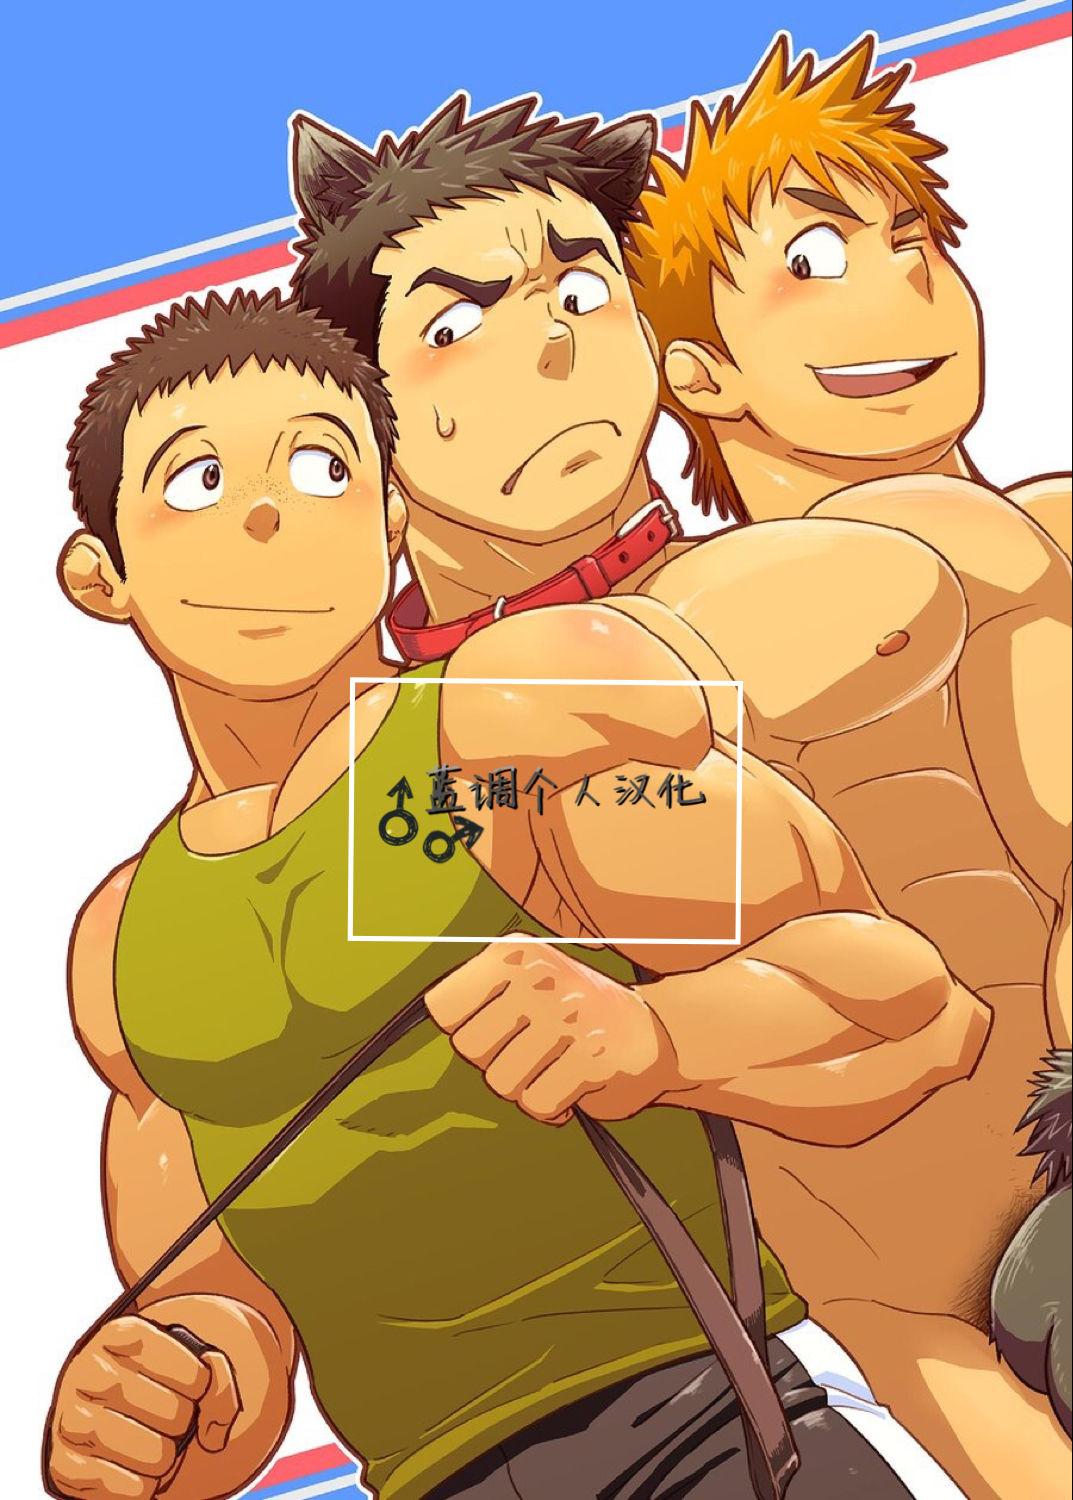 Doggy Style 出差！快递小哥【蓝调个人汉化】 - Original Gay 3some - Picture 1